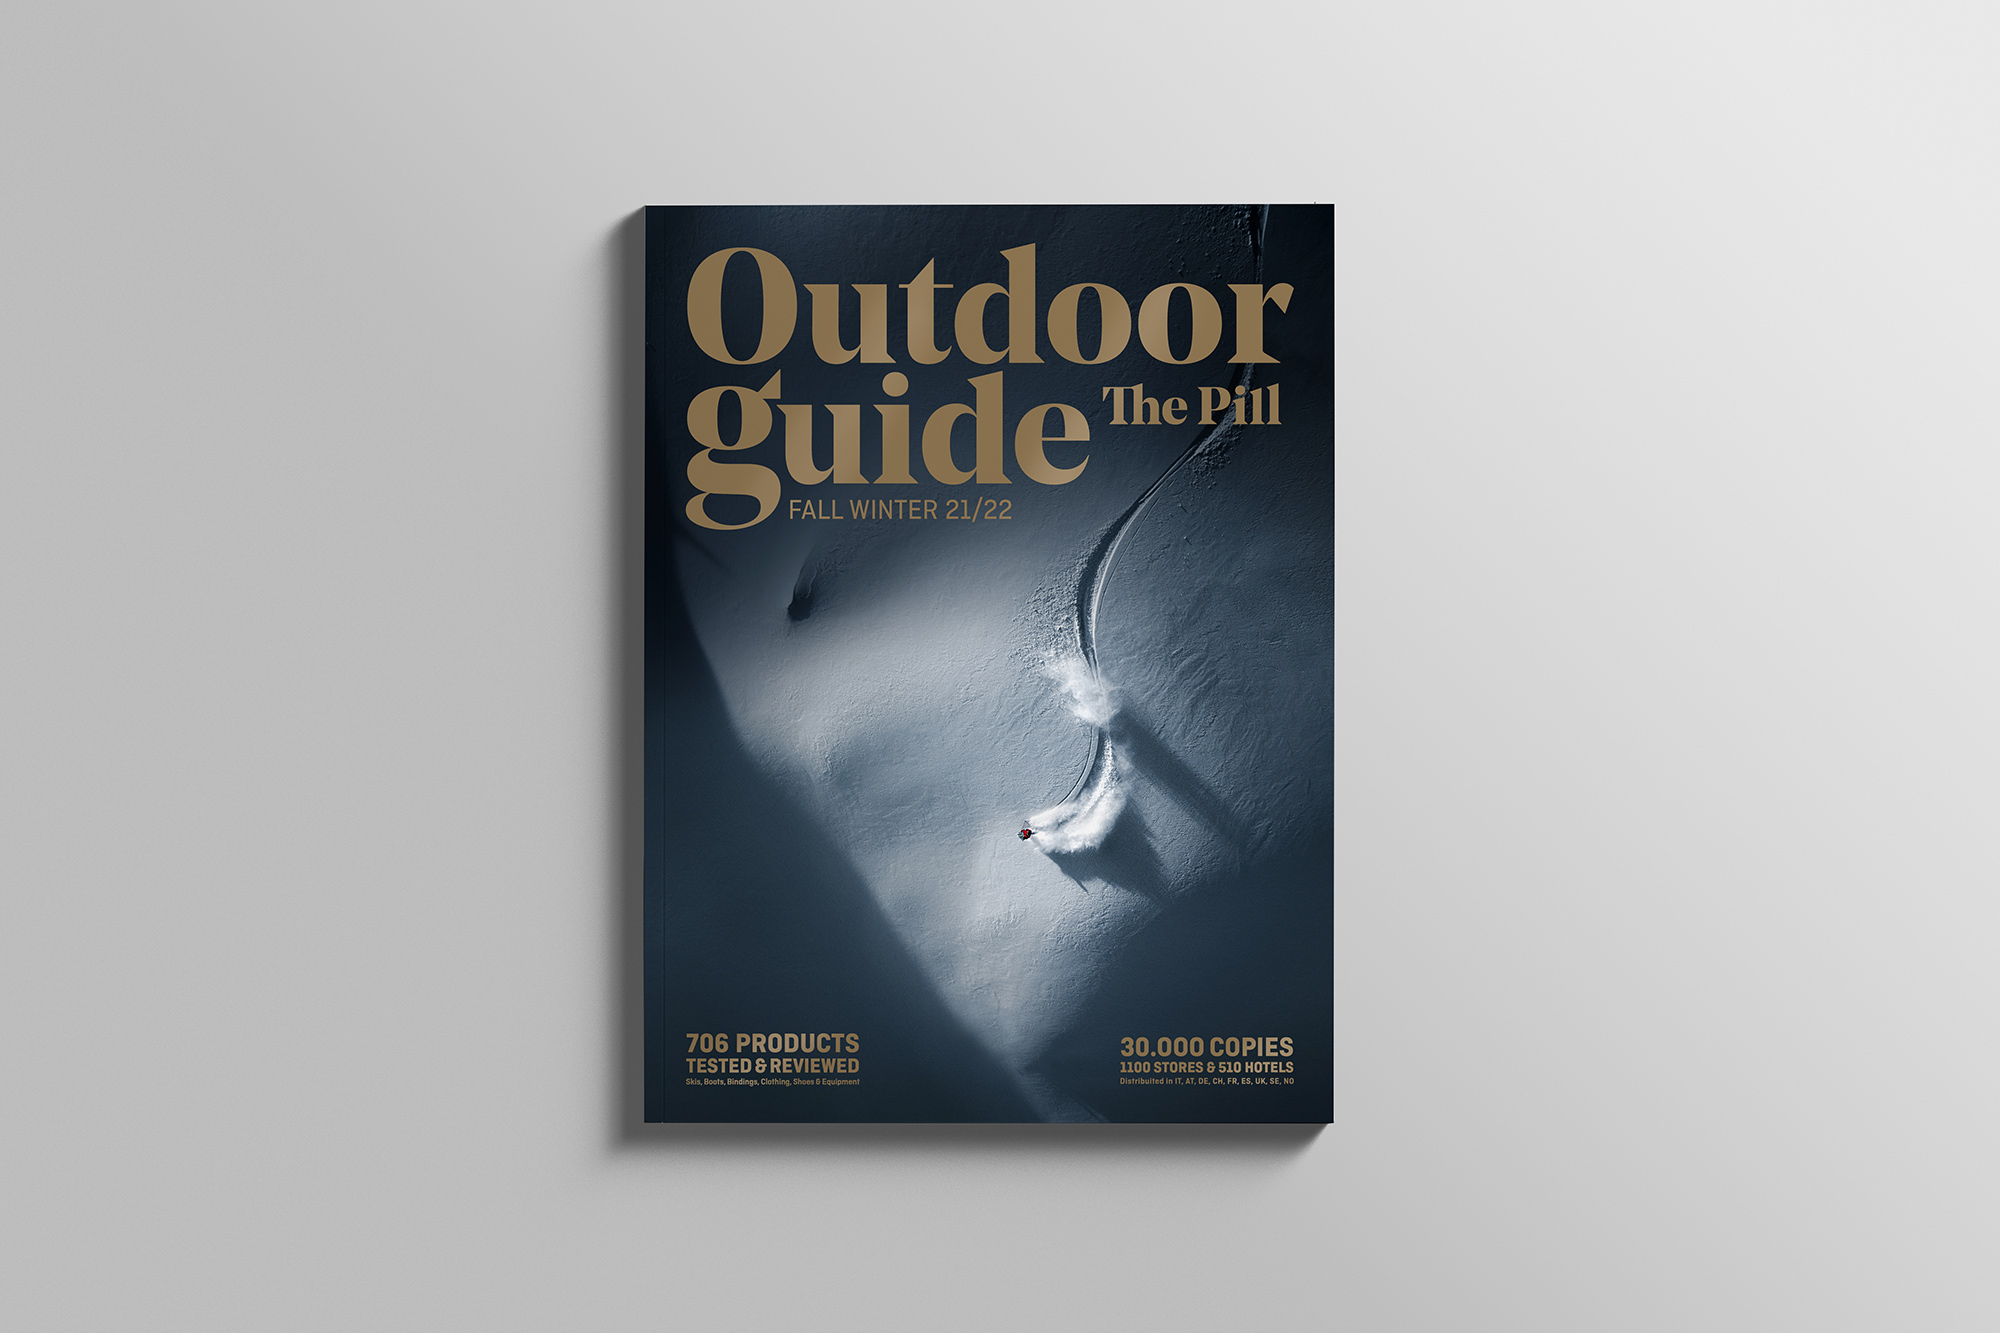 The Pill Outdoor Journal 63 ENG by The Pill - Issuu